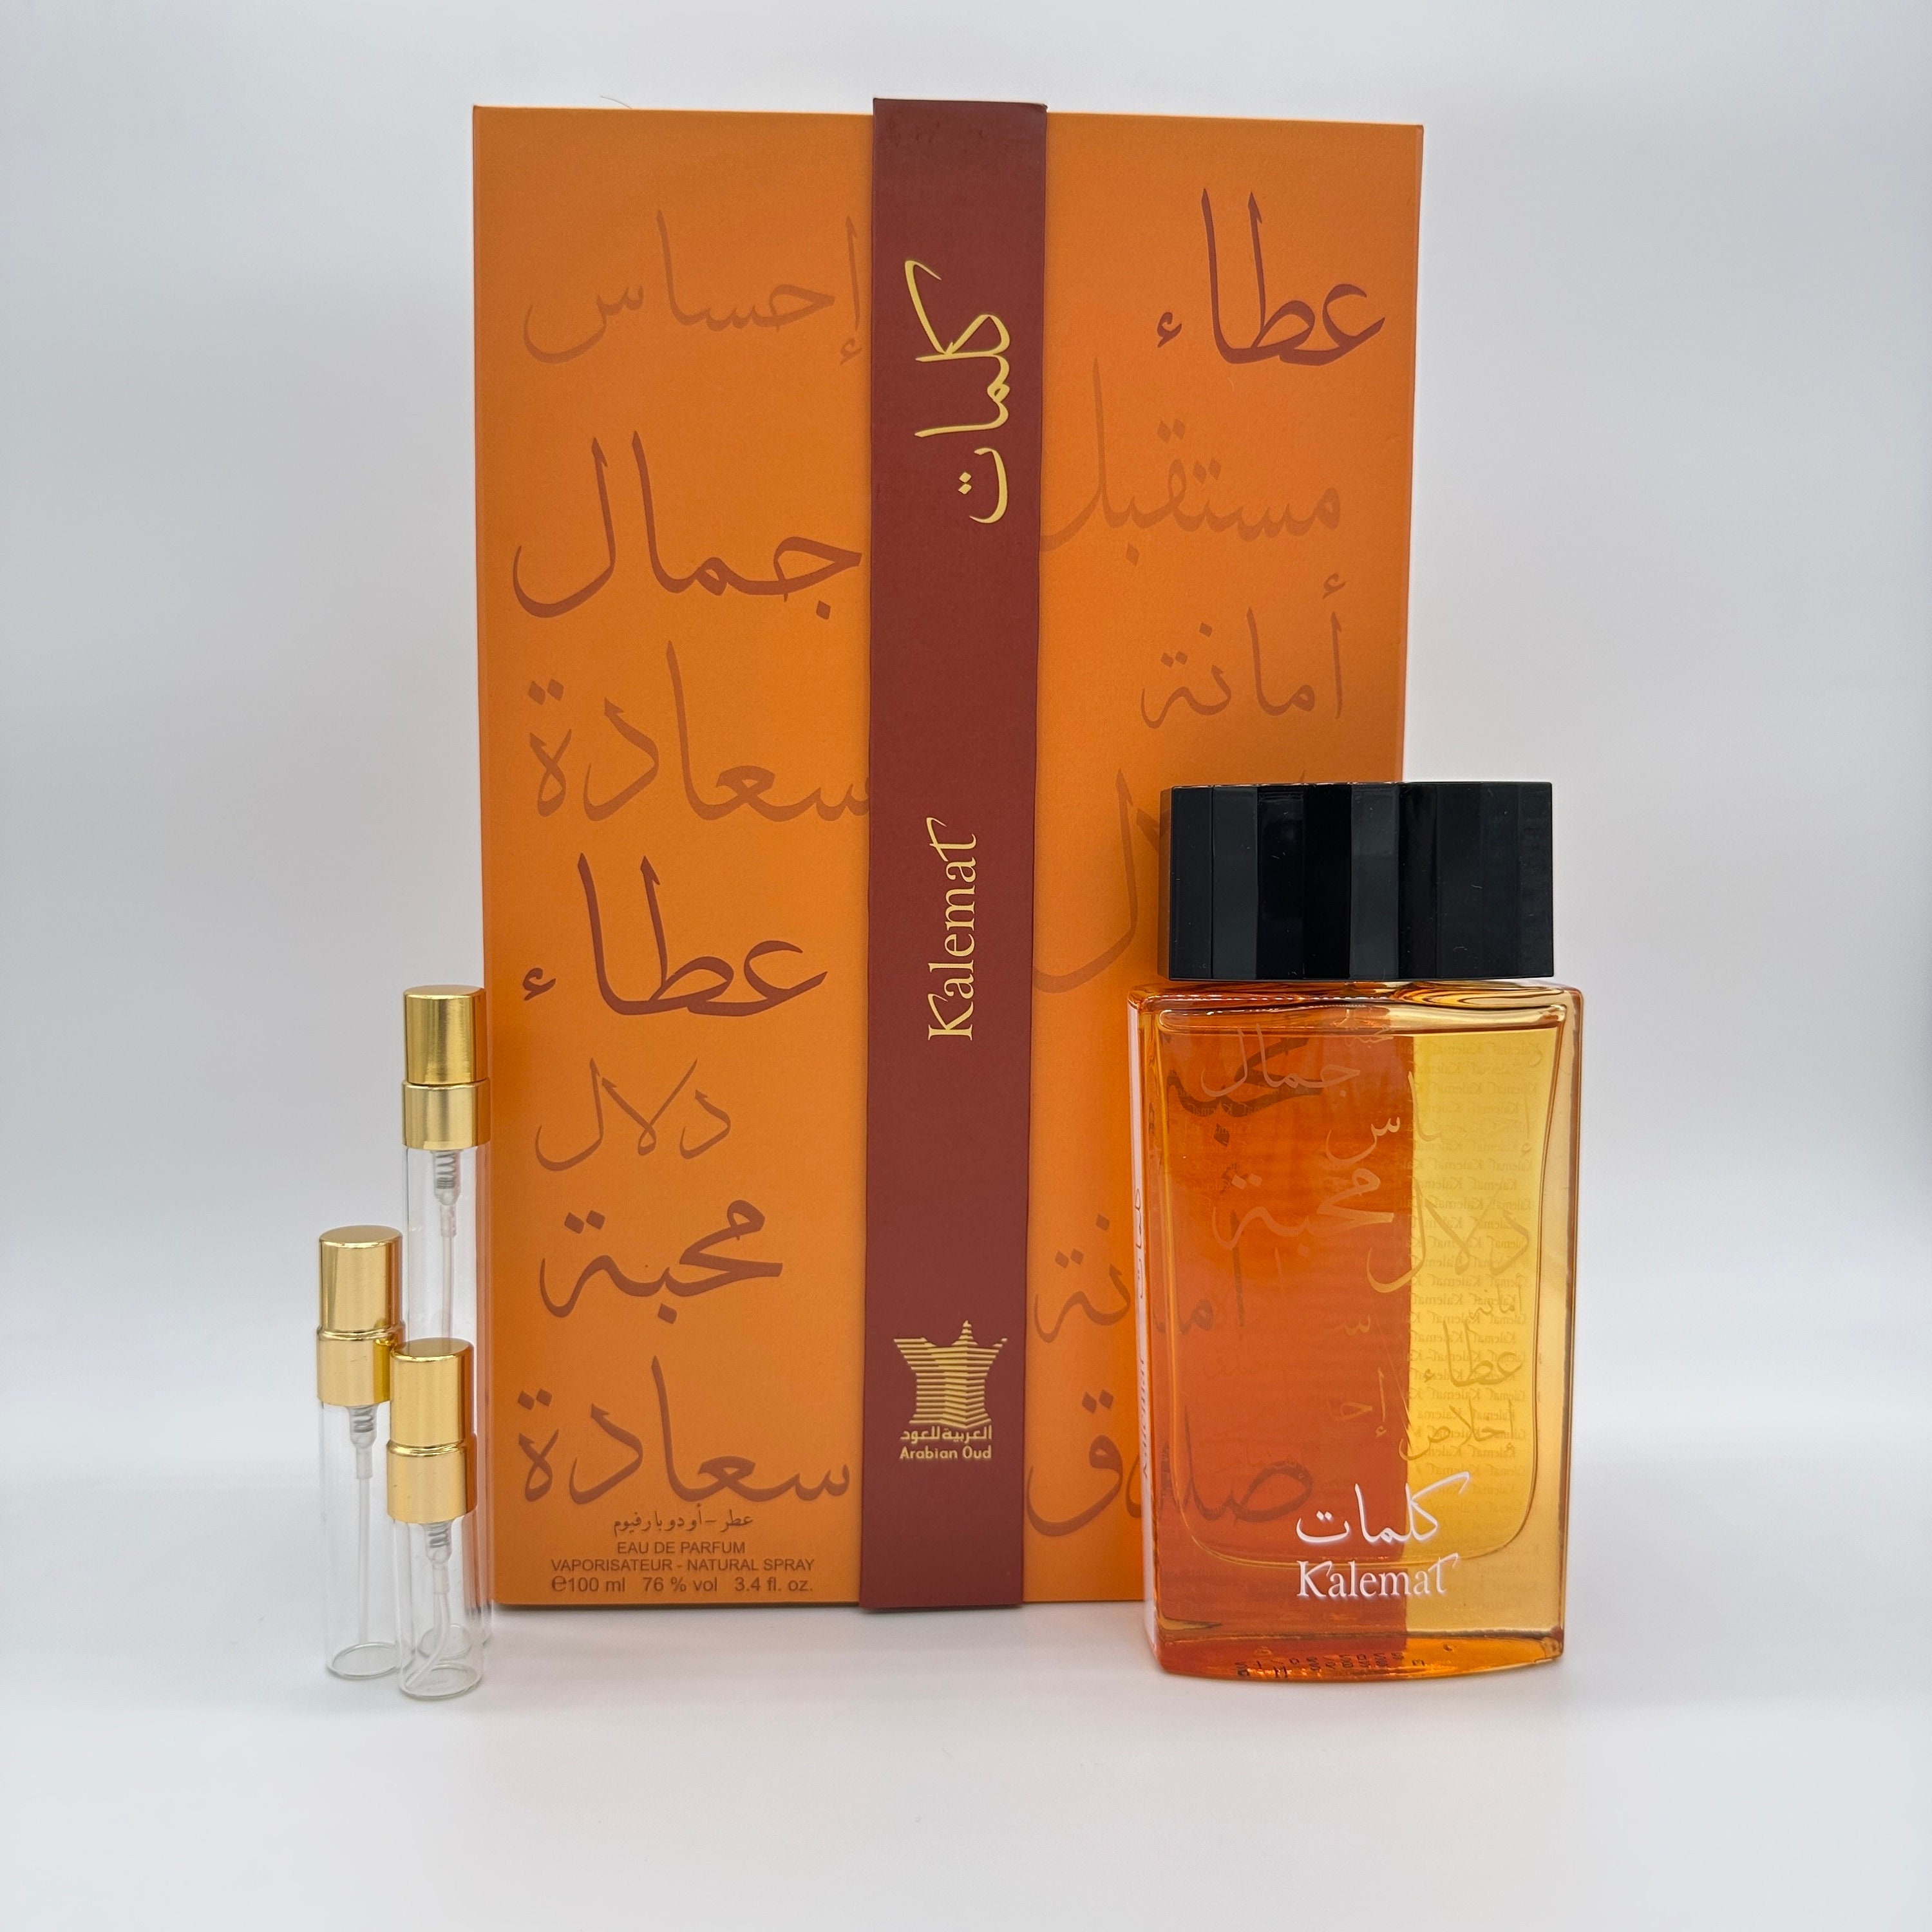 Perfume ME 348: Similar To Pur Oud By Louis Vuitton